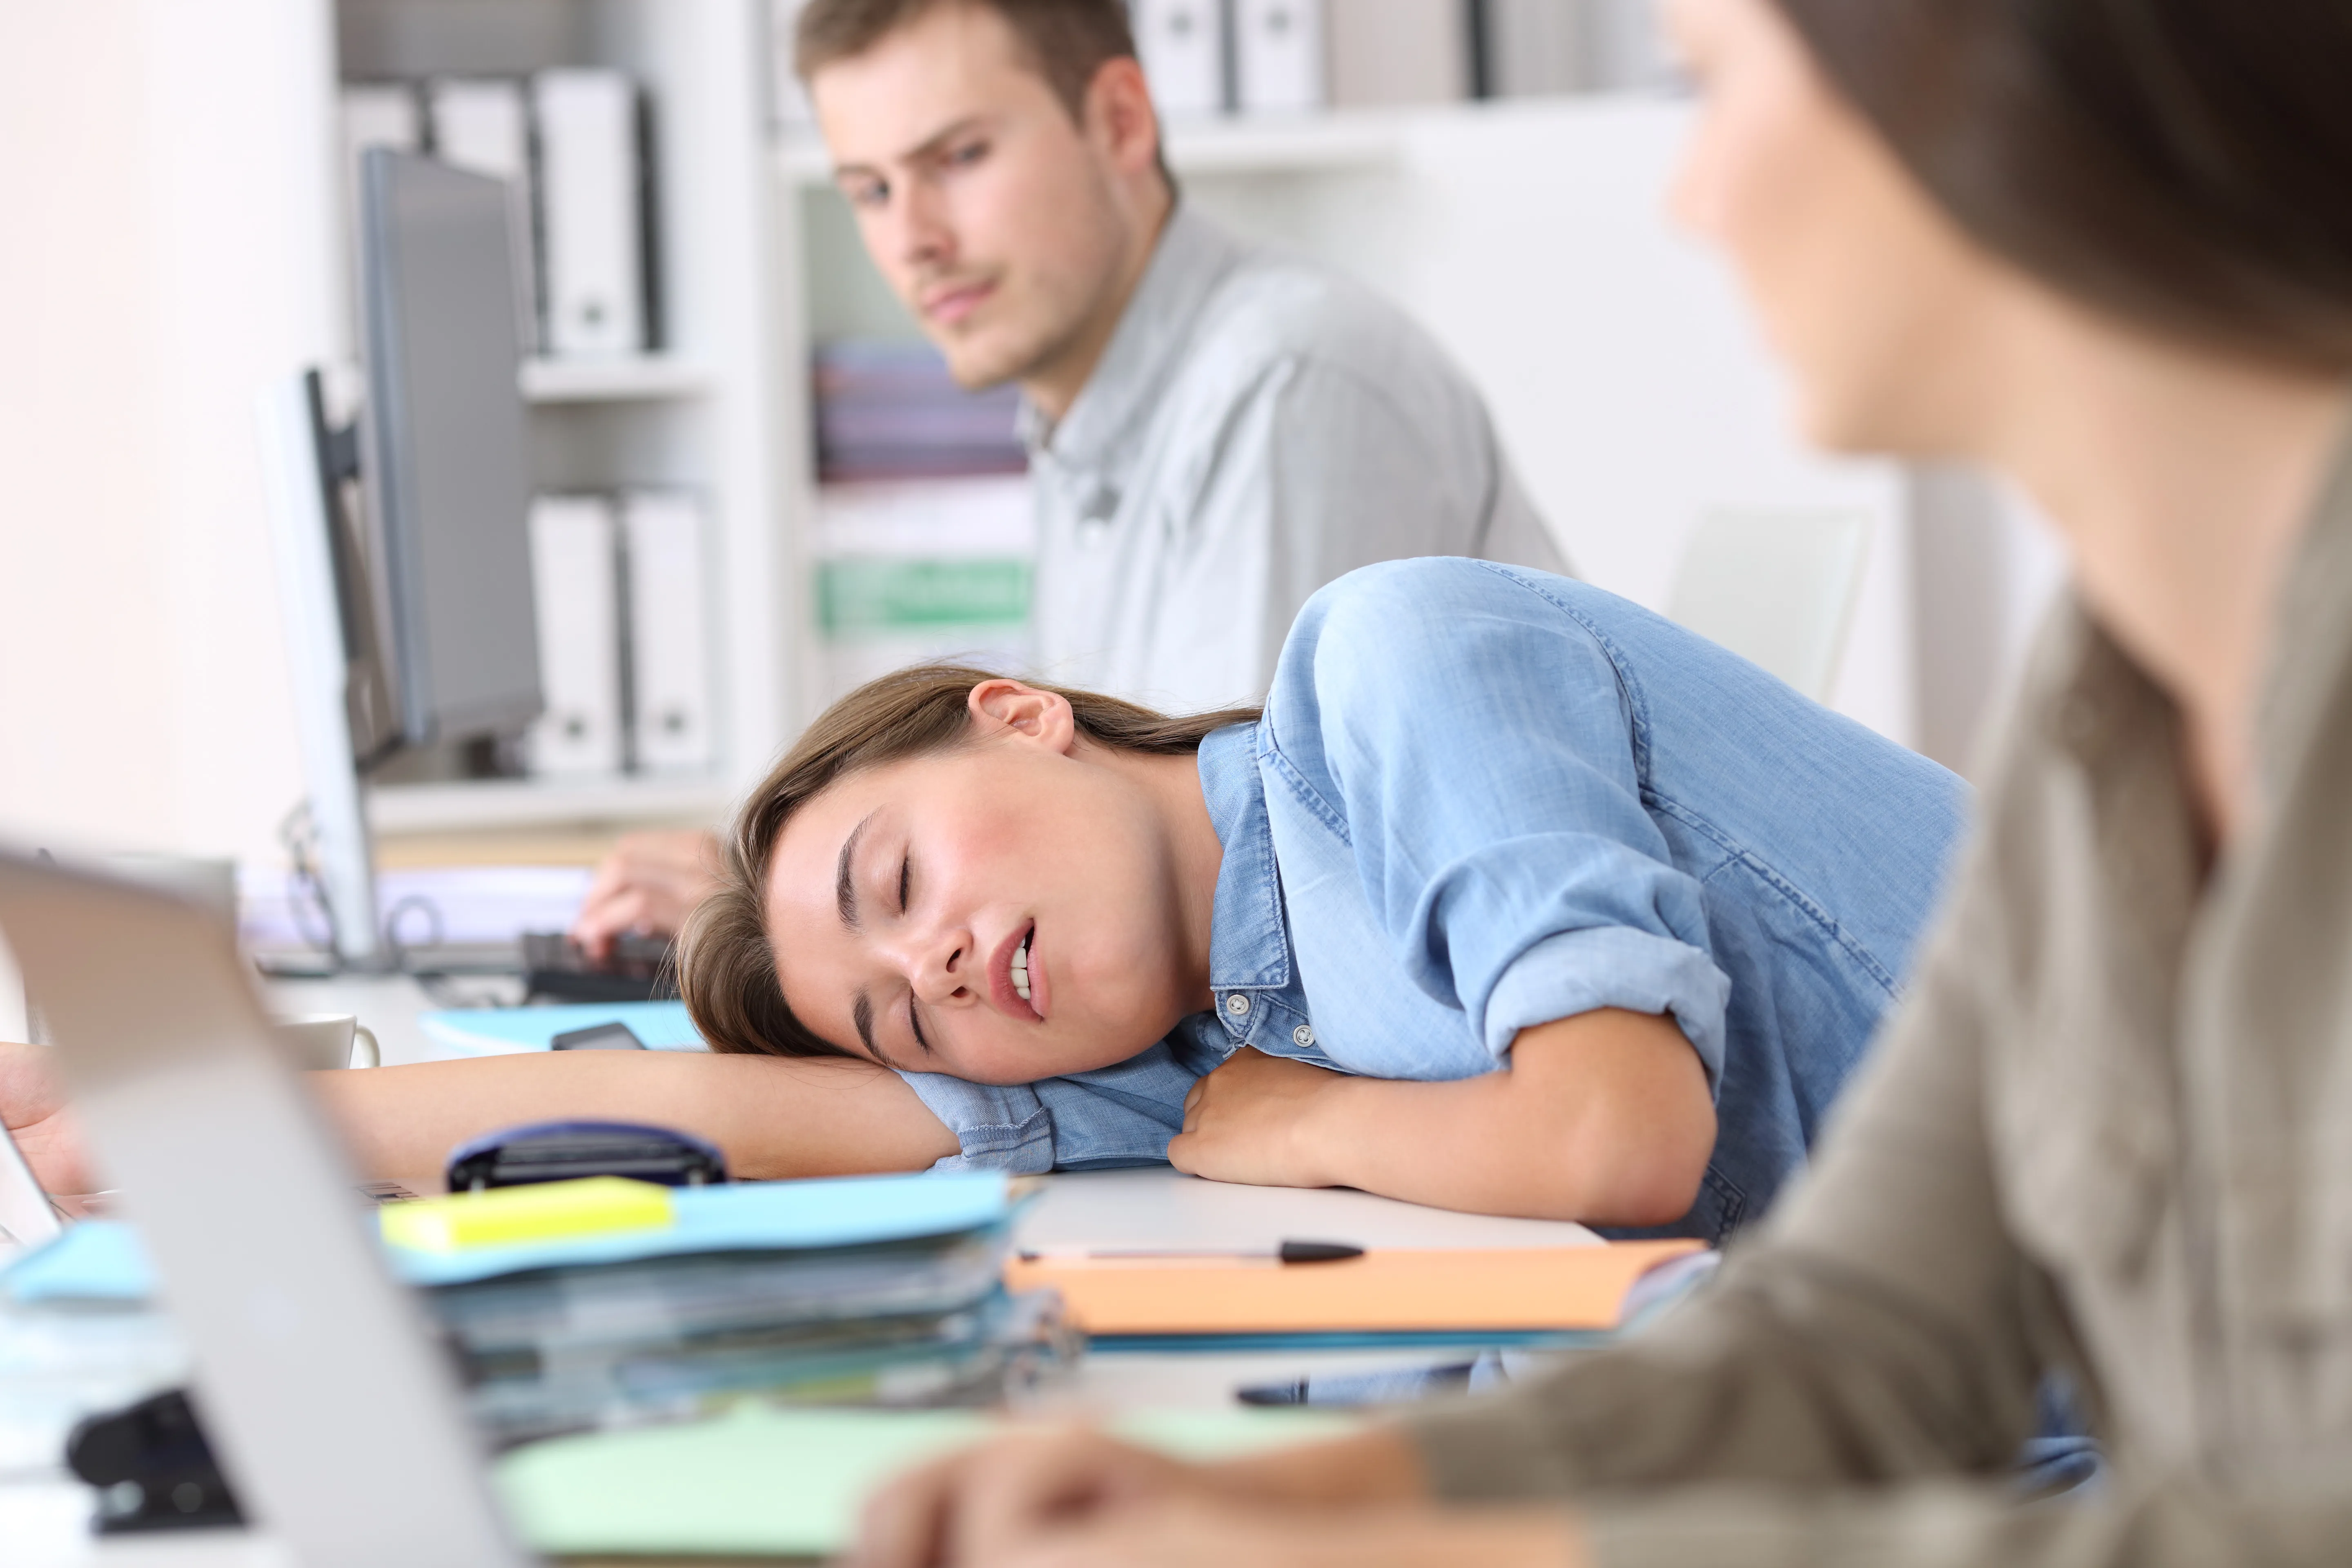 Recognizing the Signs and Symptoms of Narcolepsy